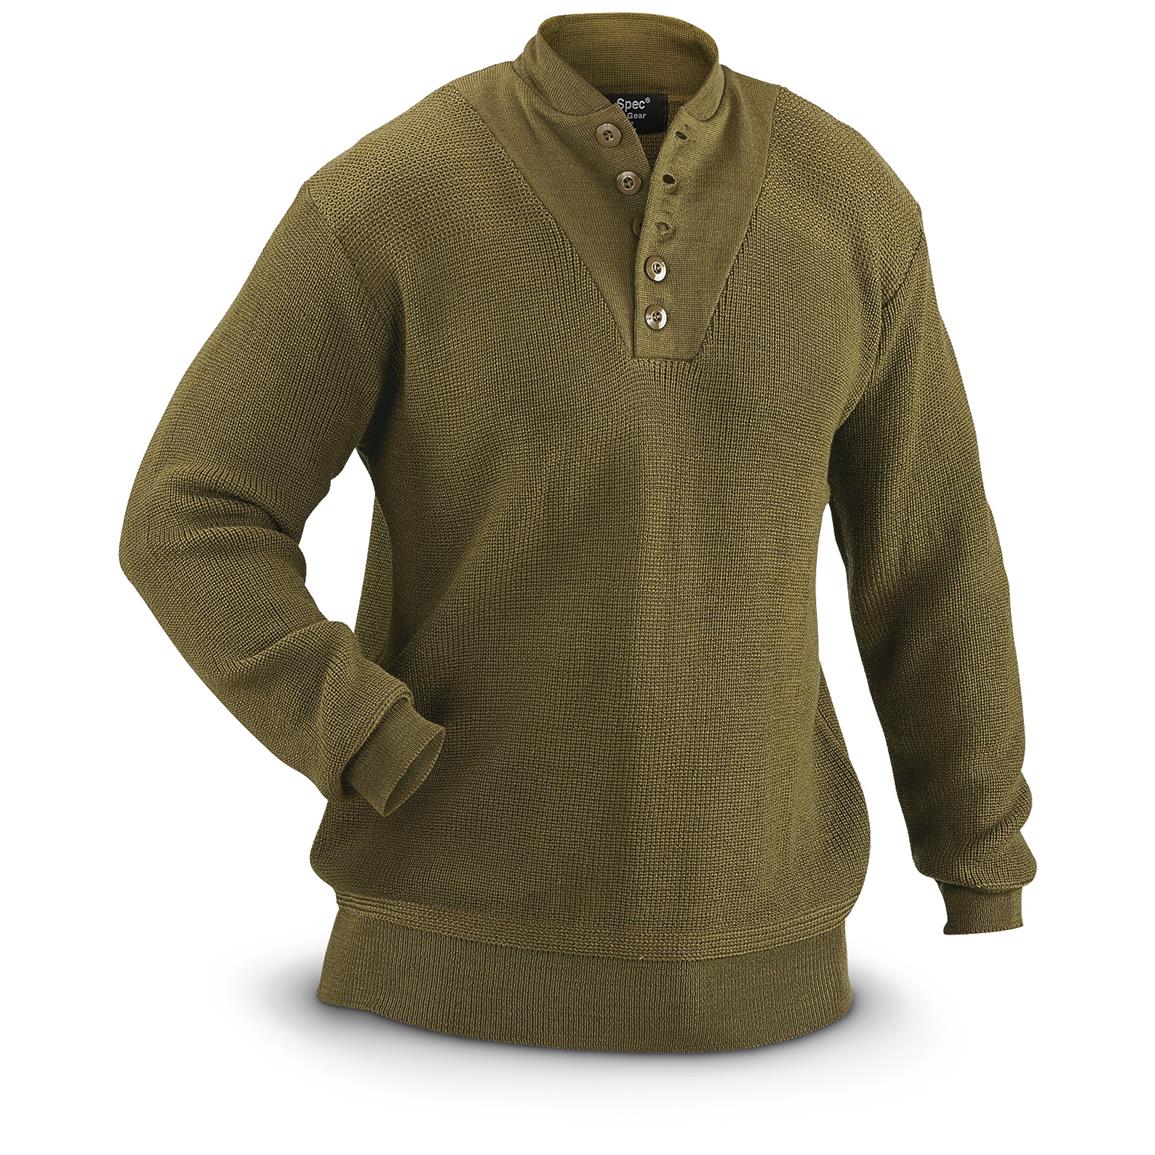 U.S. Spec Wool-blend Military-style Sweater - 641094, Tactical Clothing ...